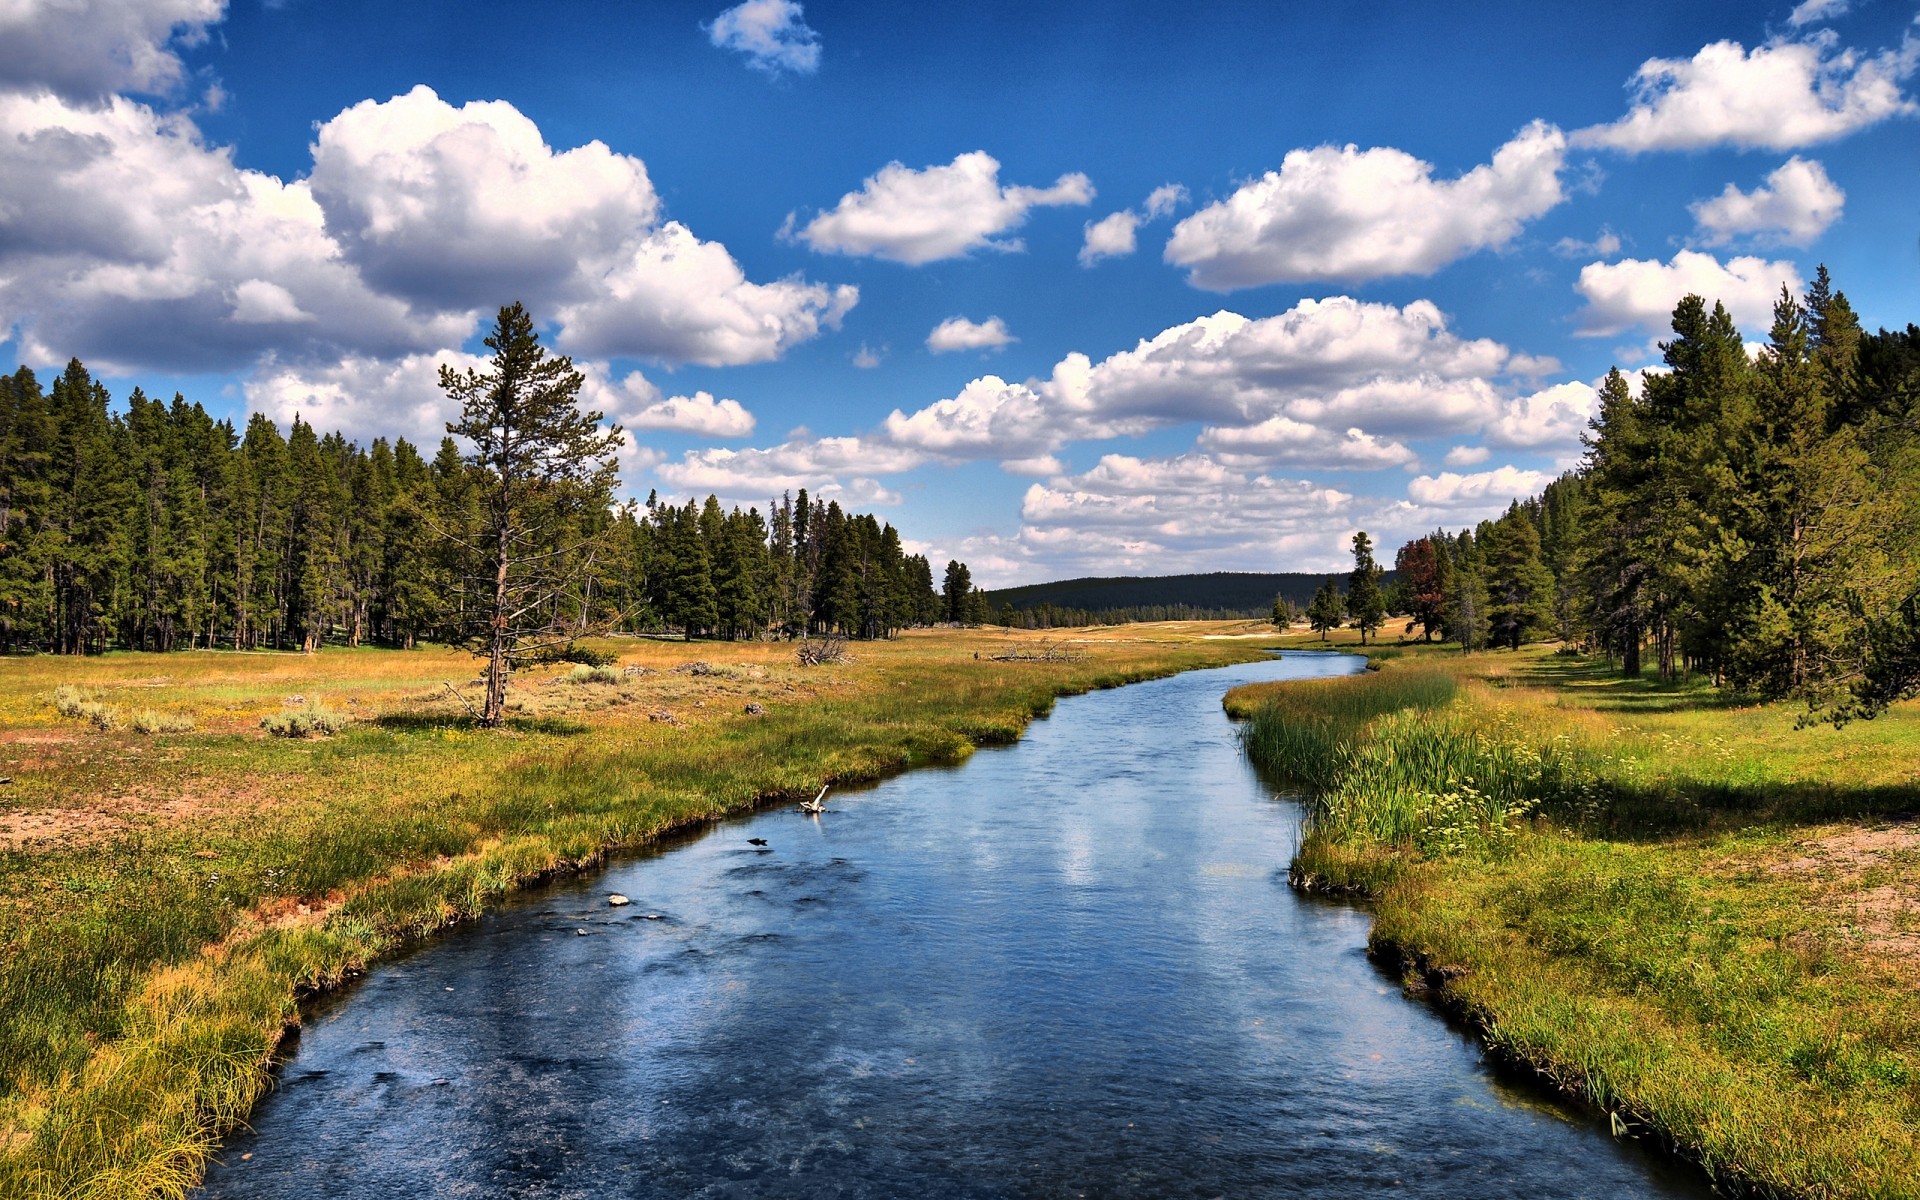 landscapes water nature landscape outdoors lake wood river reflection grass tree sky travel summer composure rivers trees wyoming yellowstone national park hdr